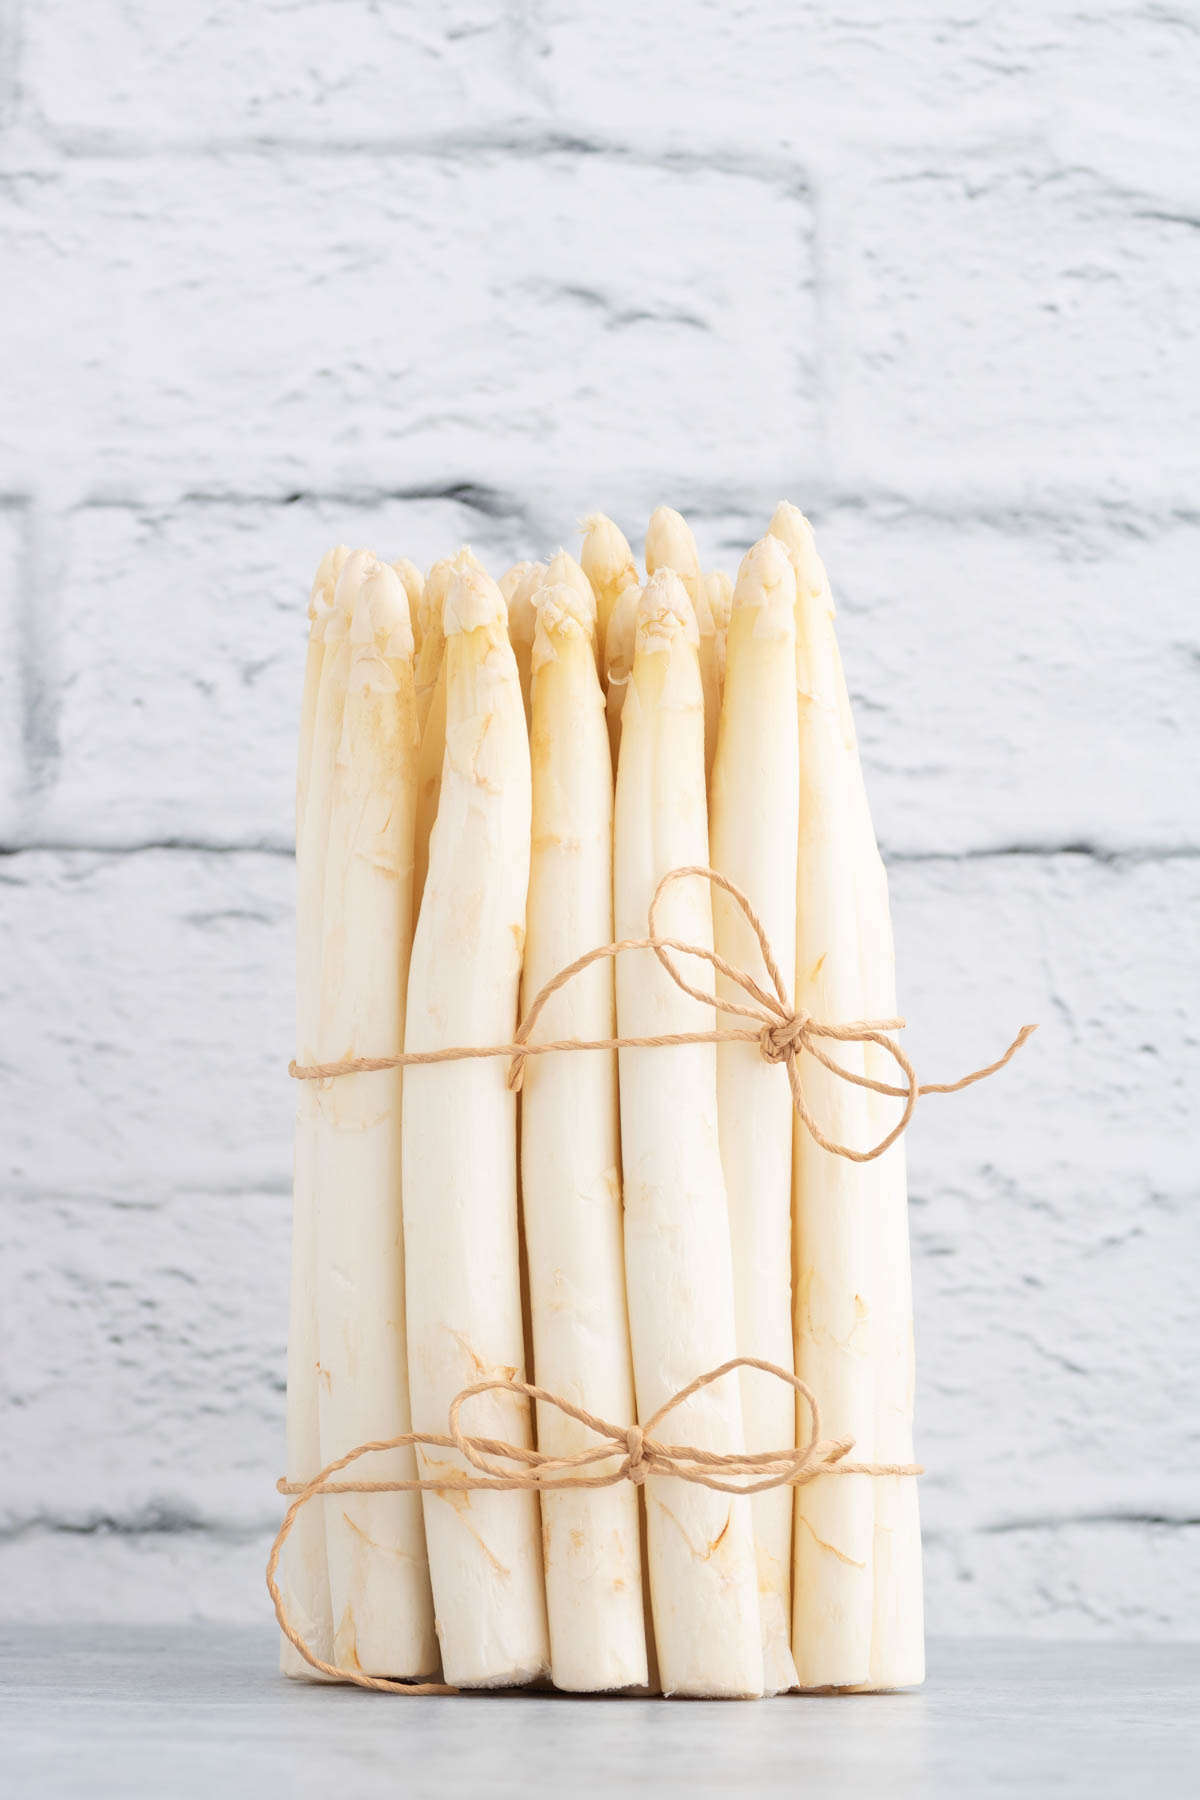 A bundle of raw white asparagus tied with string.